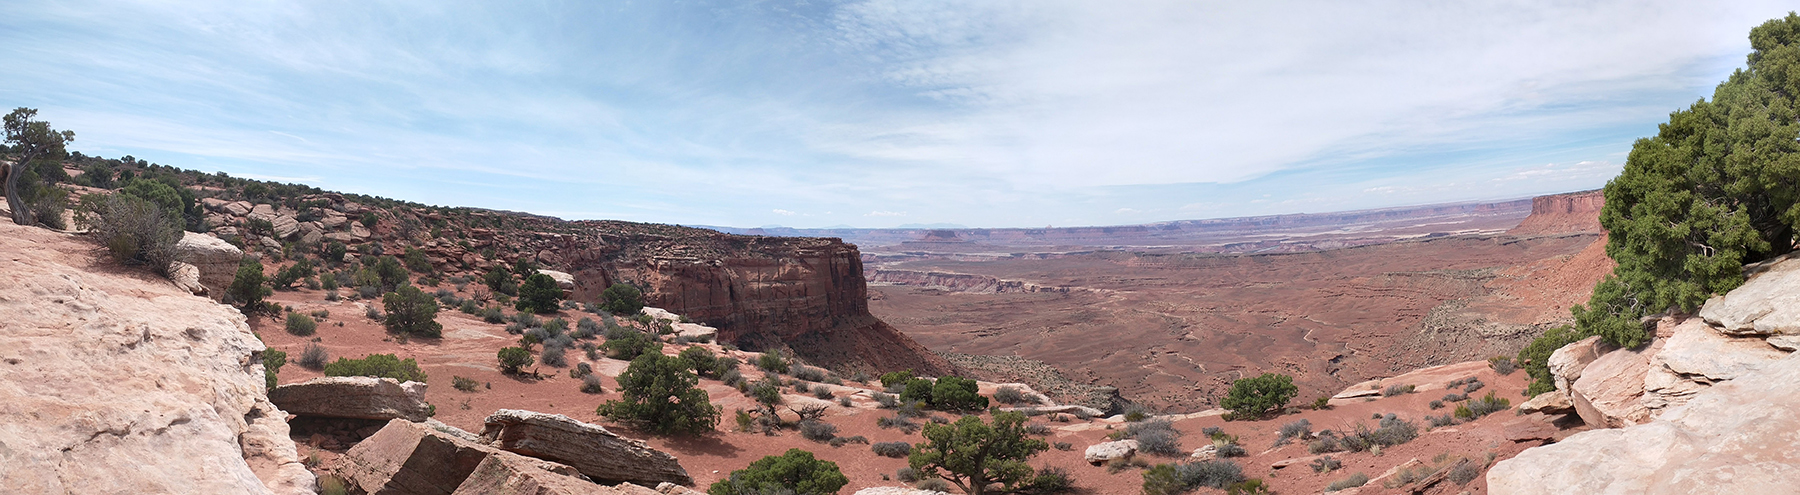 Panoramic View of Canyons at Arches National Park in Utah